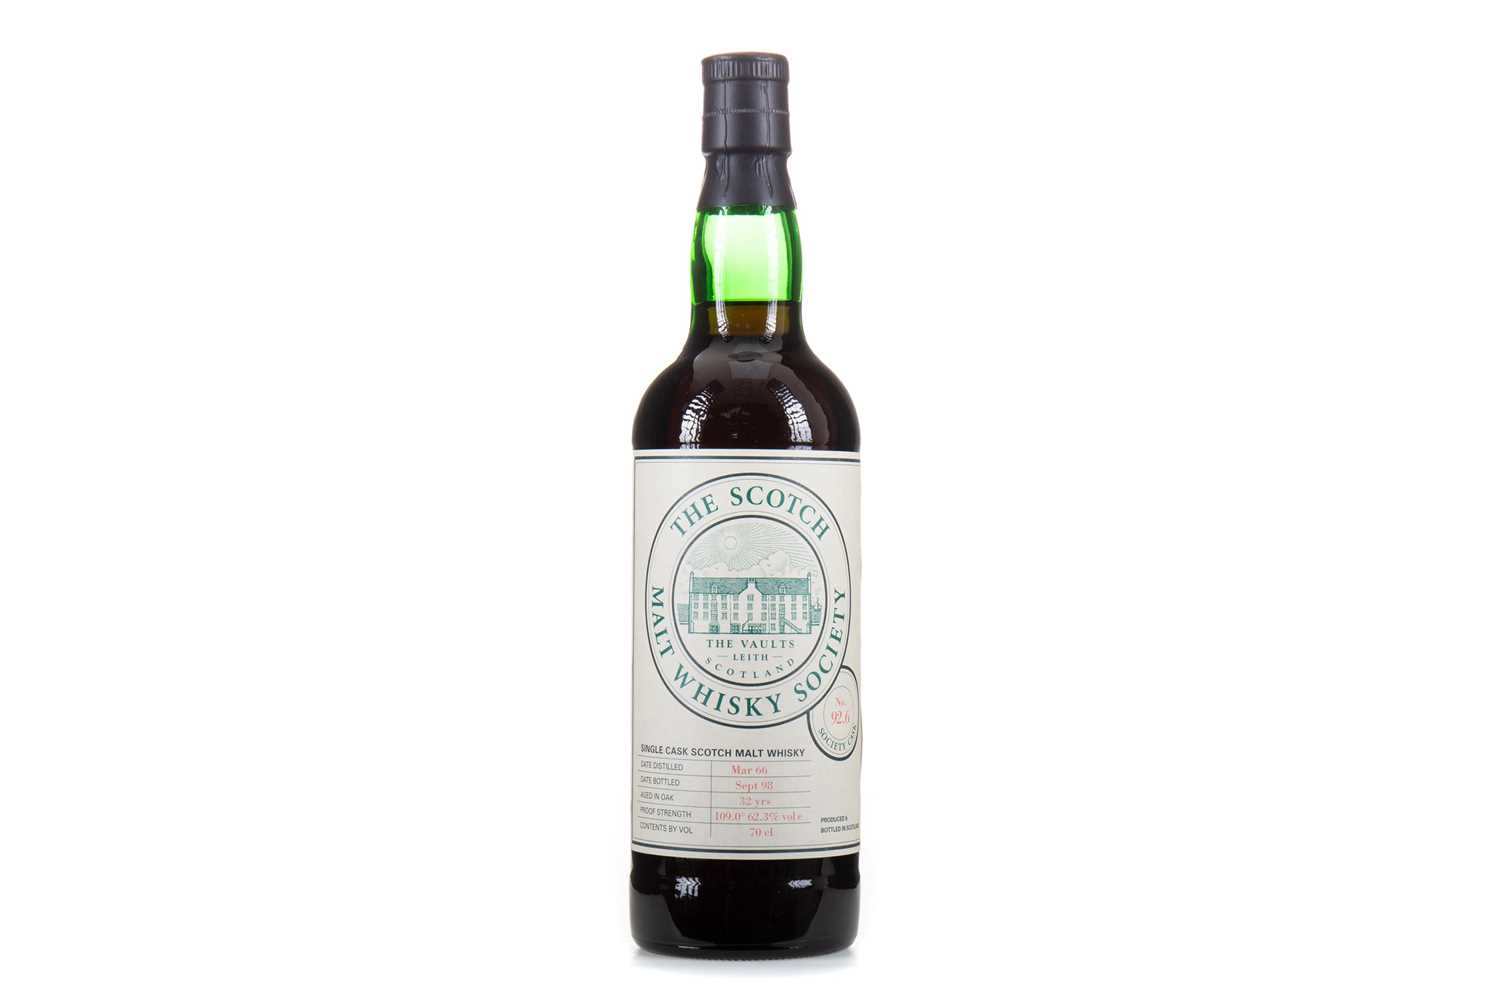 Lot 592 - SMWS 92.6 LOCHSIDE 1966 32 YEAR OLD